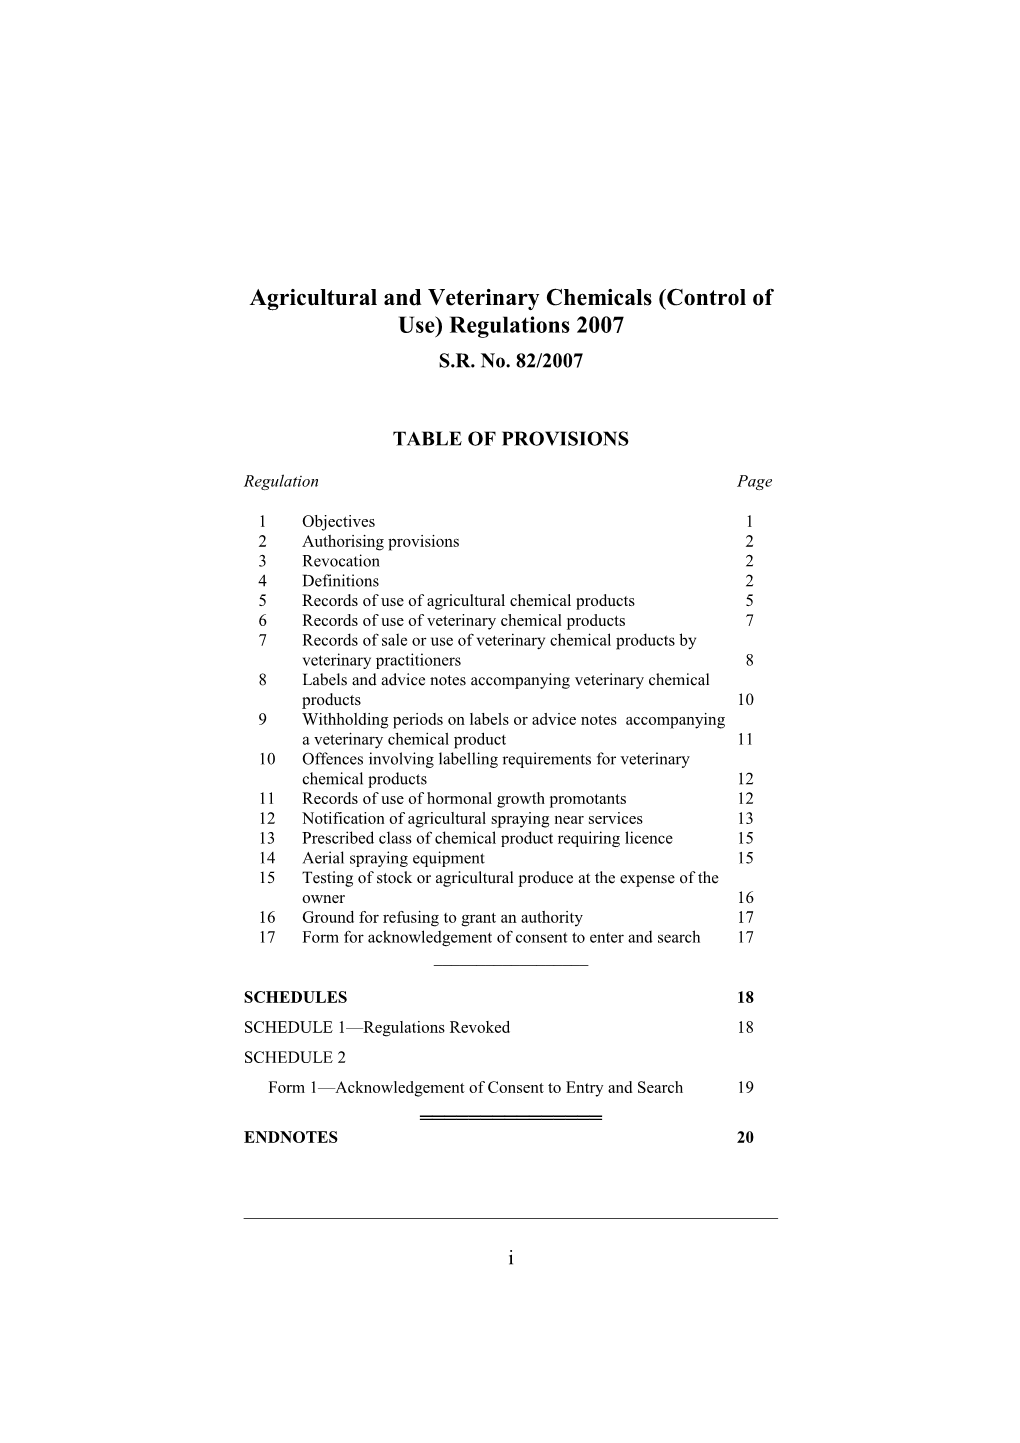 Agricultural and Veterinary Chemicals (Control of Use) Regulations 2007